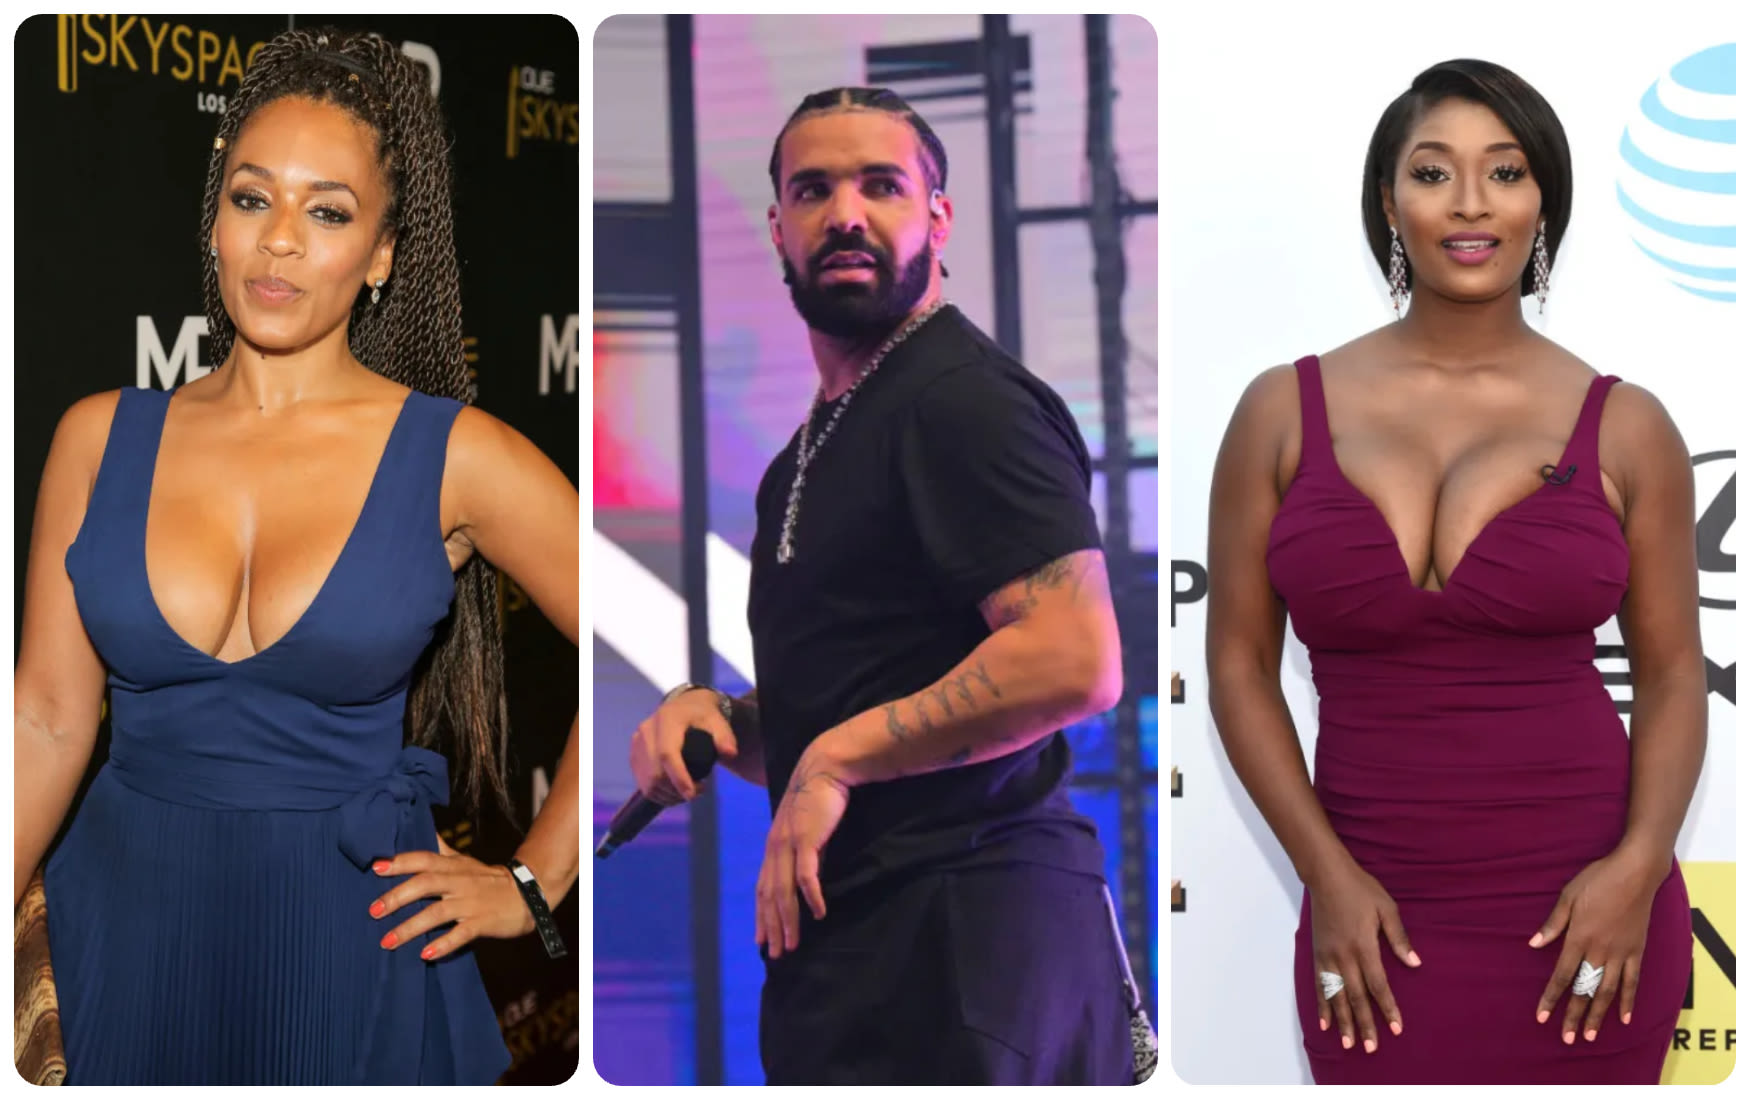 Toccara Jones Says She Discovered Drake Was Double Dipping With Her Homegirl Melyssa Ford While Getting Ready...